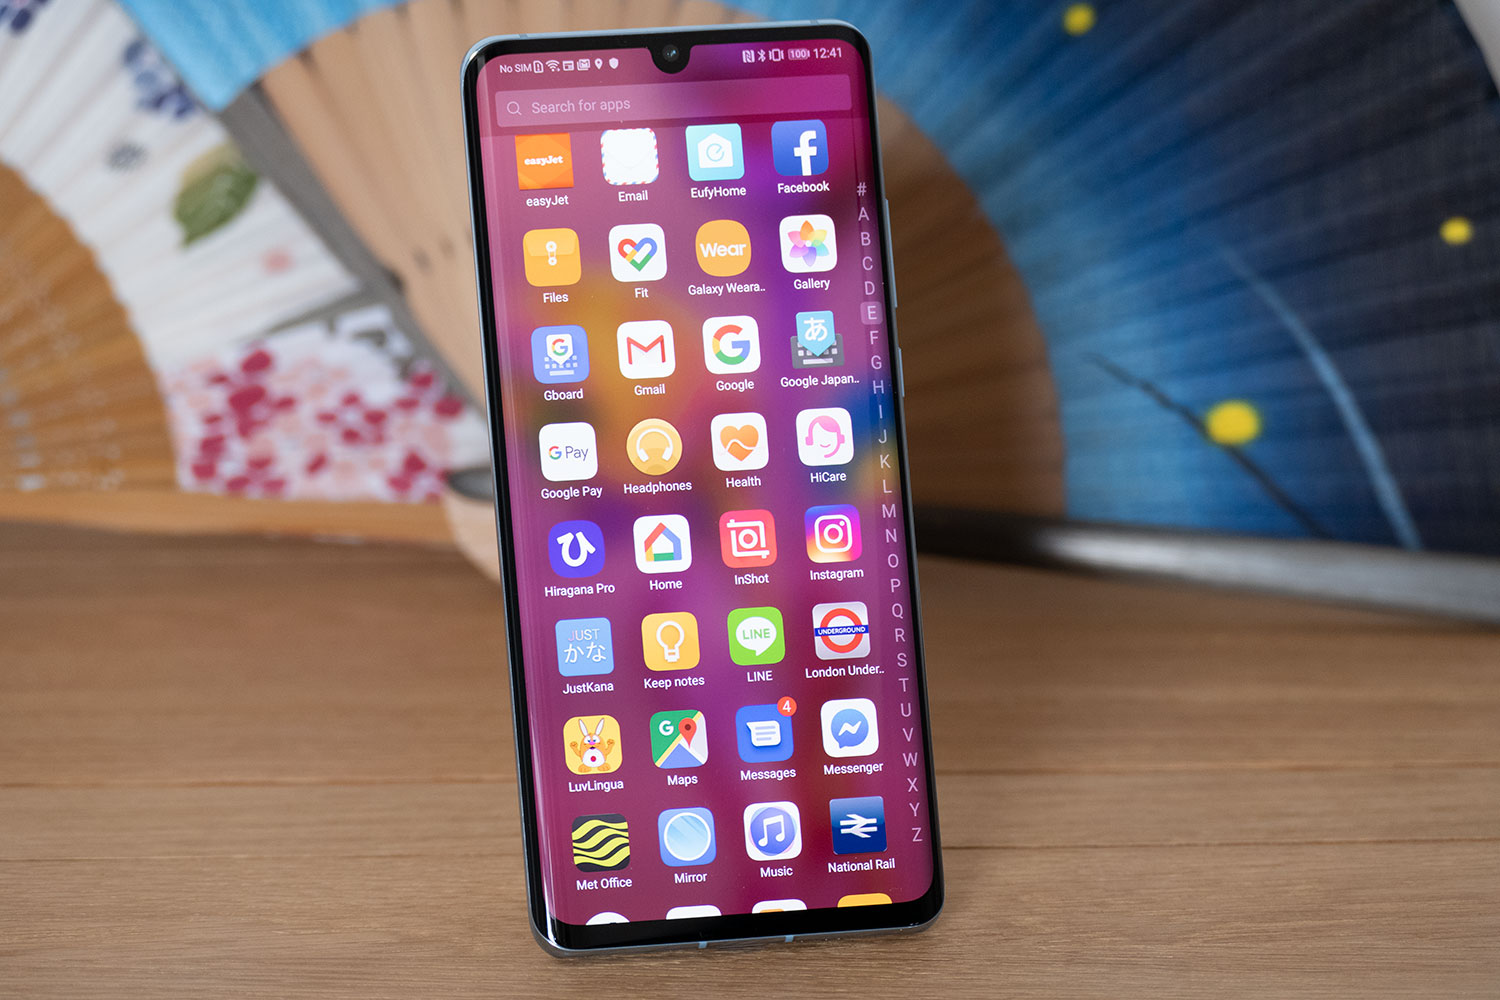 Huawei P30 Smartphone Review